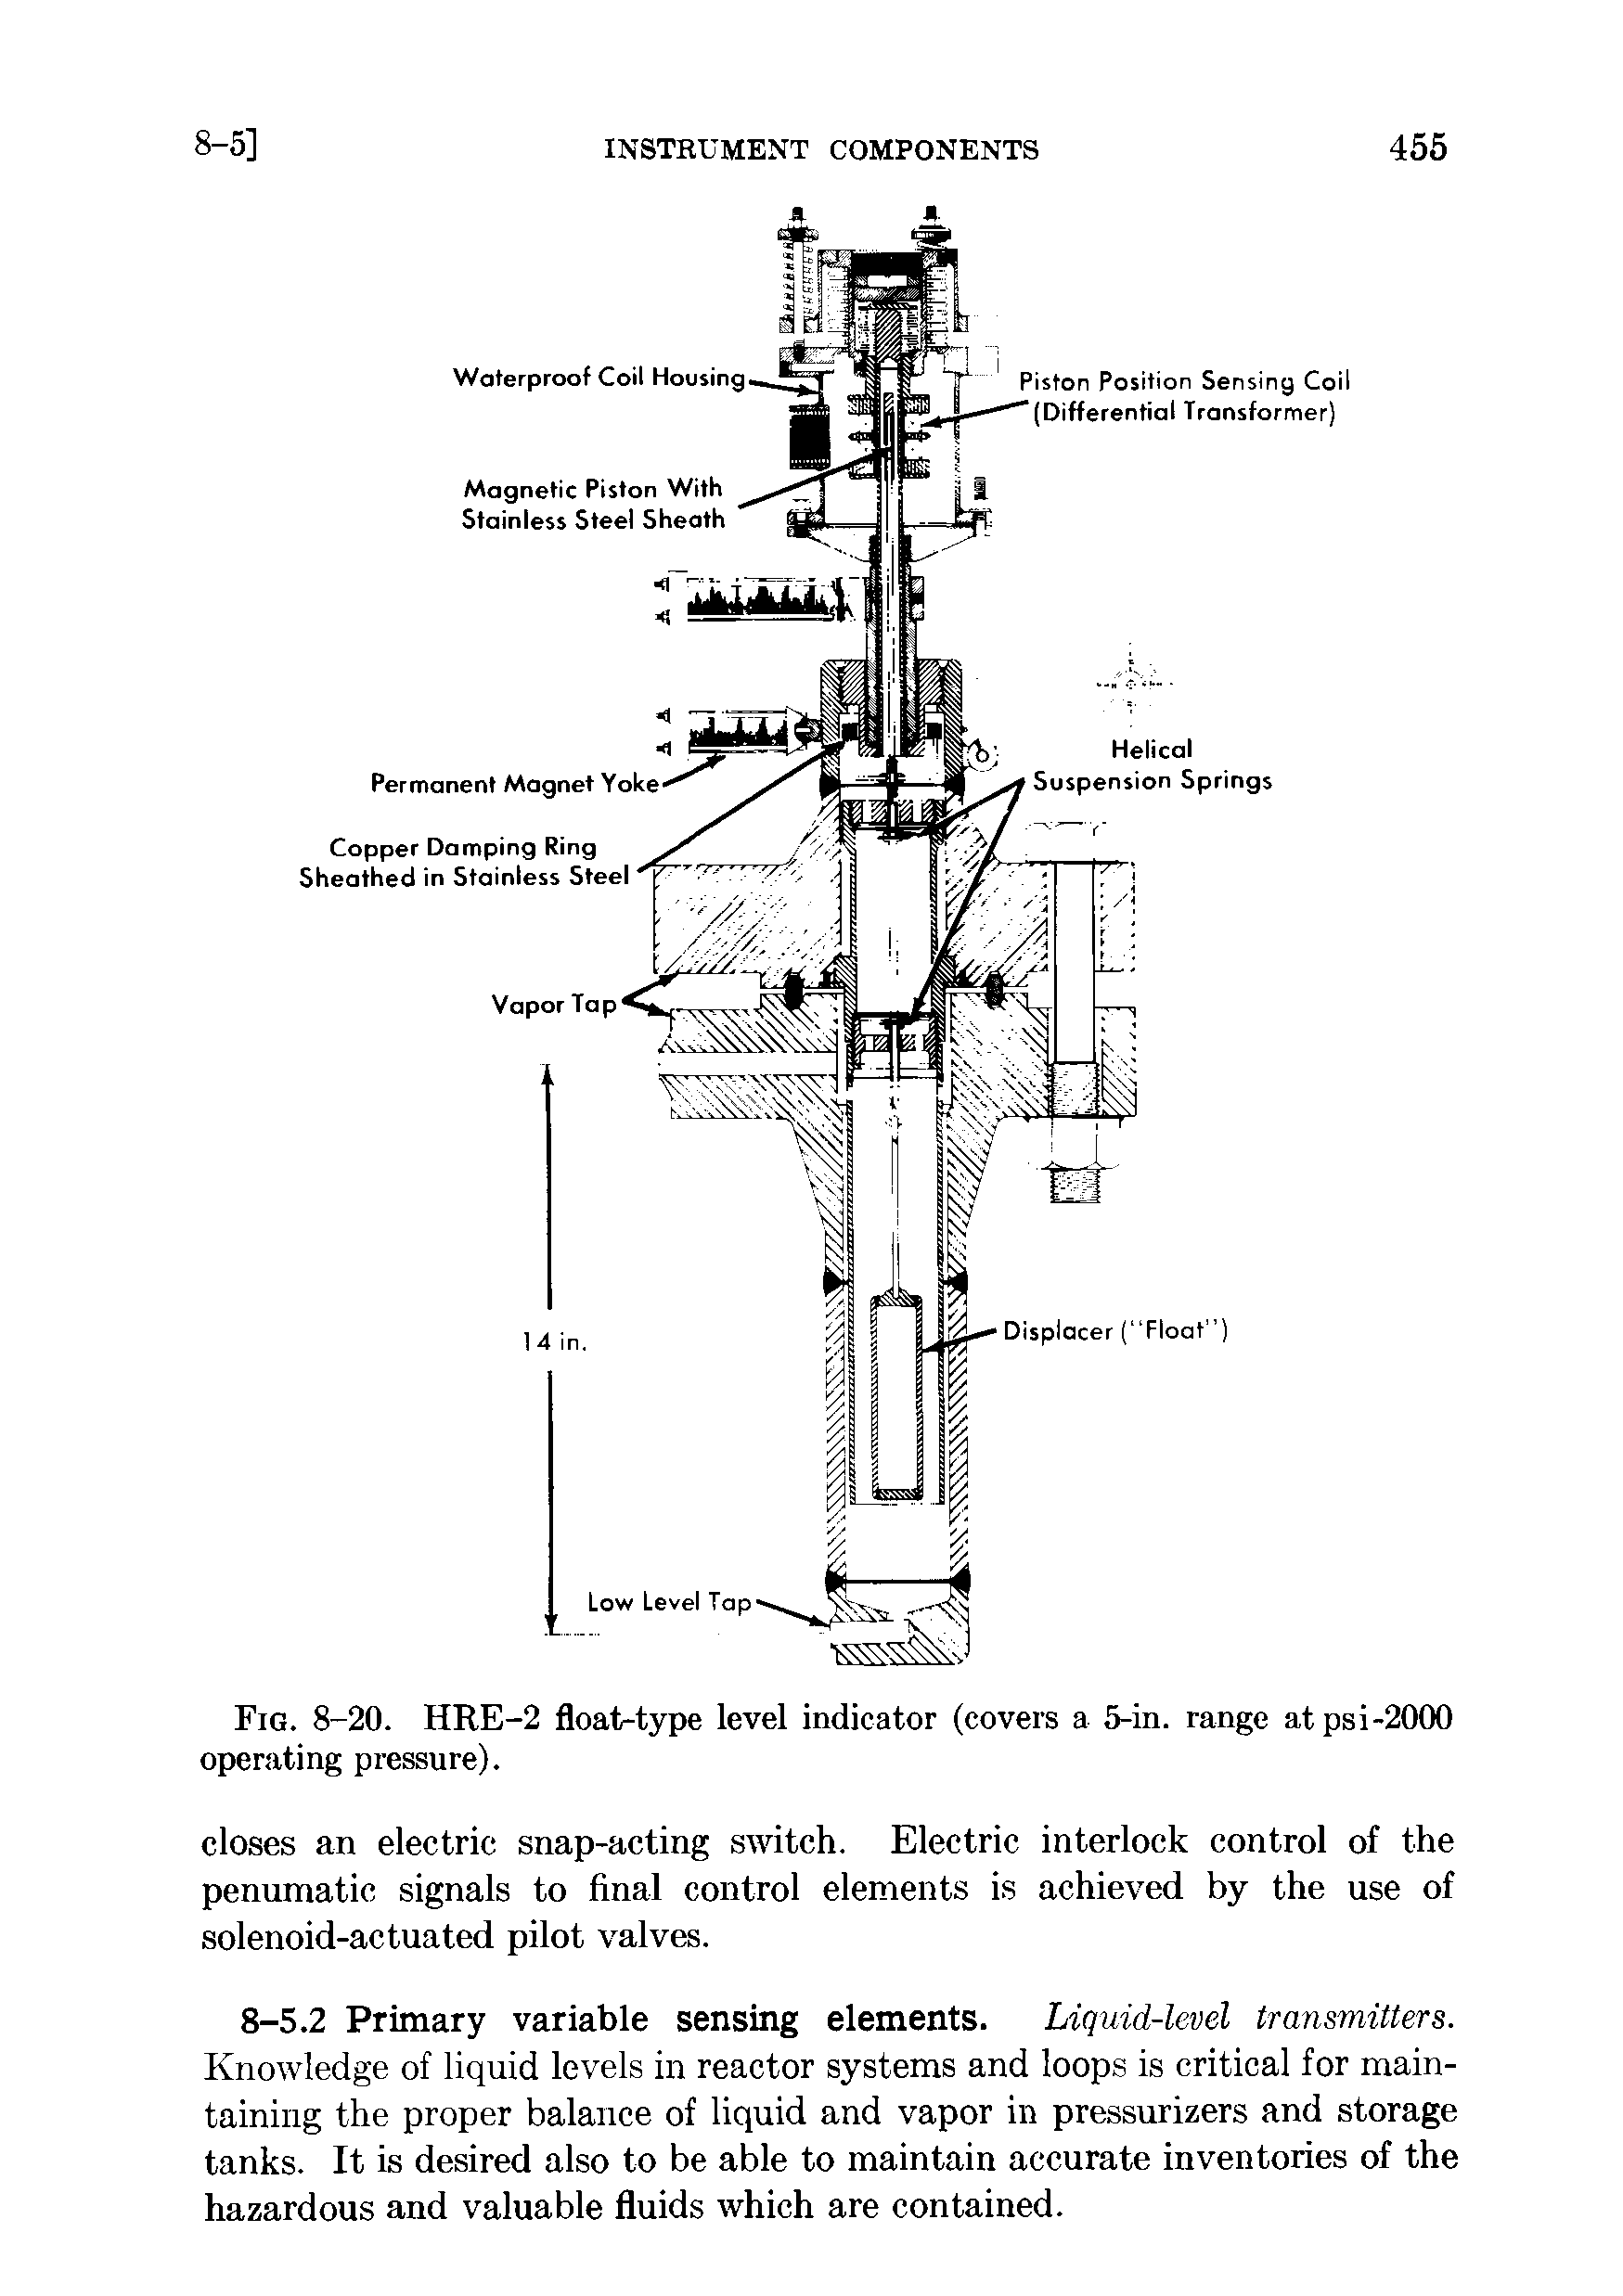 Fig. 8-20. HRE-2 float-type level indicator (covers a 5-in. range at psi-2000 operating pressure).